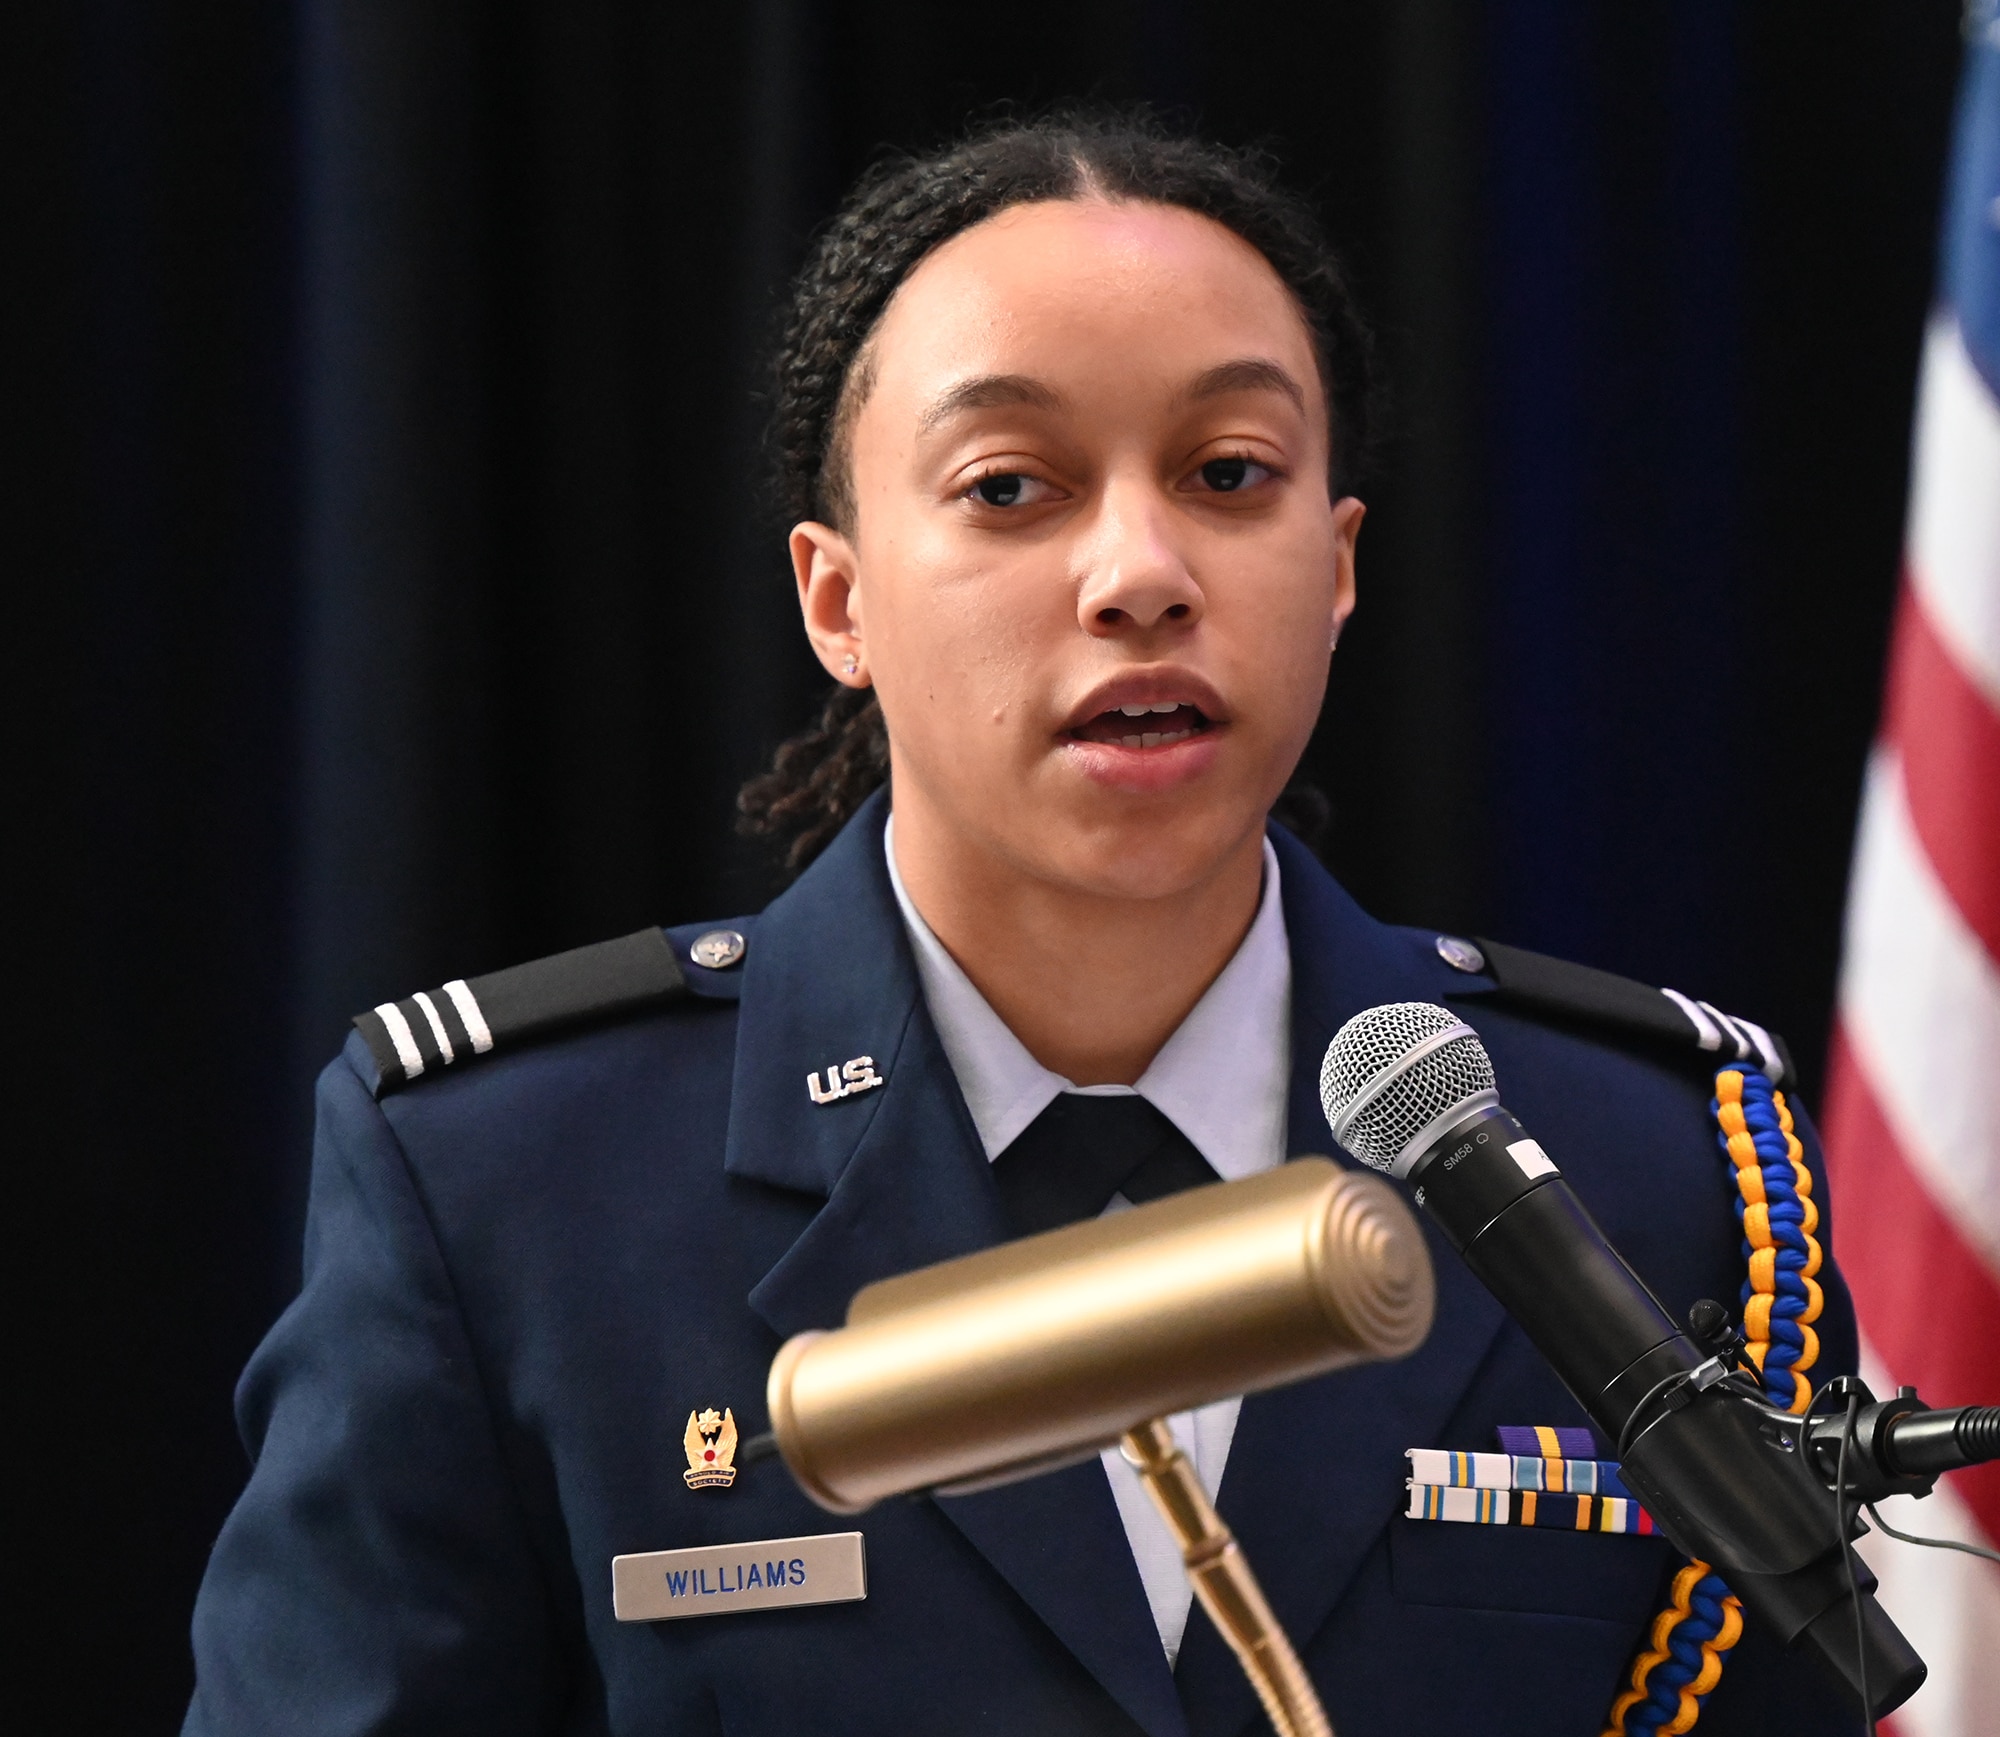 Cadet Cayla Williams addresses the audience after receiving the Brig. Gen. Charles E. McGee Leadership Award during a ceremony at the Samuel Riggs IV Alumni Center, University of Maryland, College Park, Md., Jan 27, 2023. The award was presented by Chief of Staff of the Air Force Gen. CQ Brown, Jr..